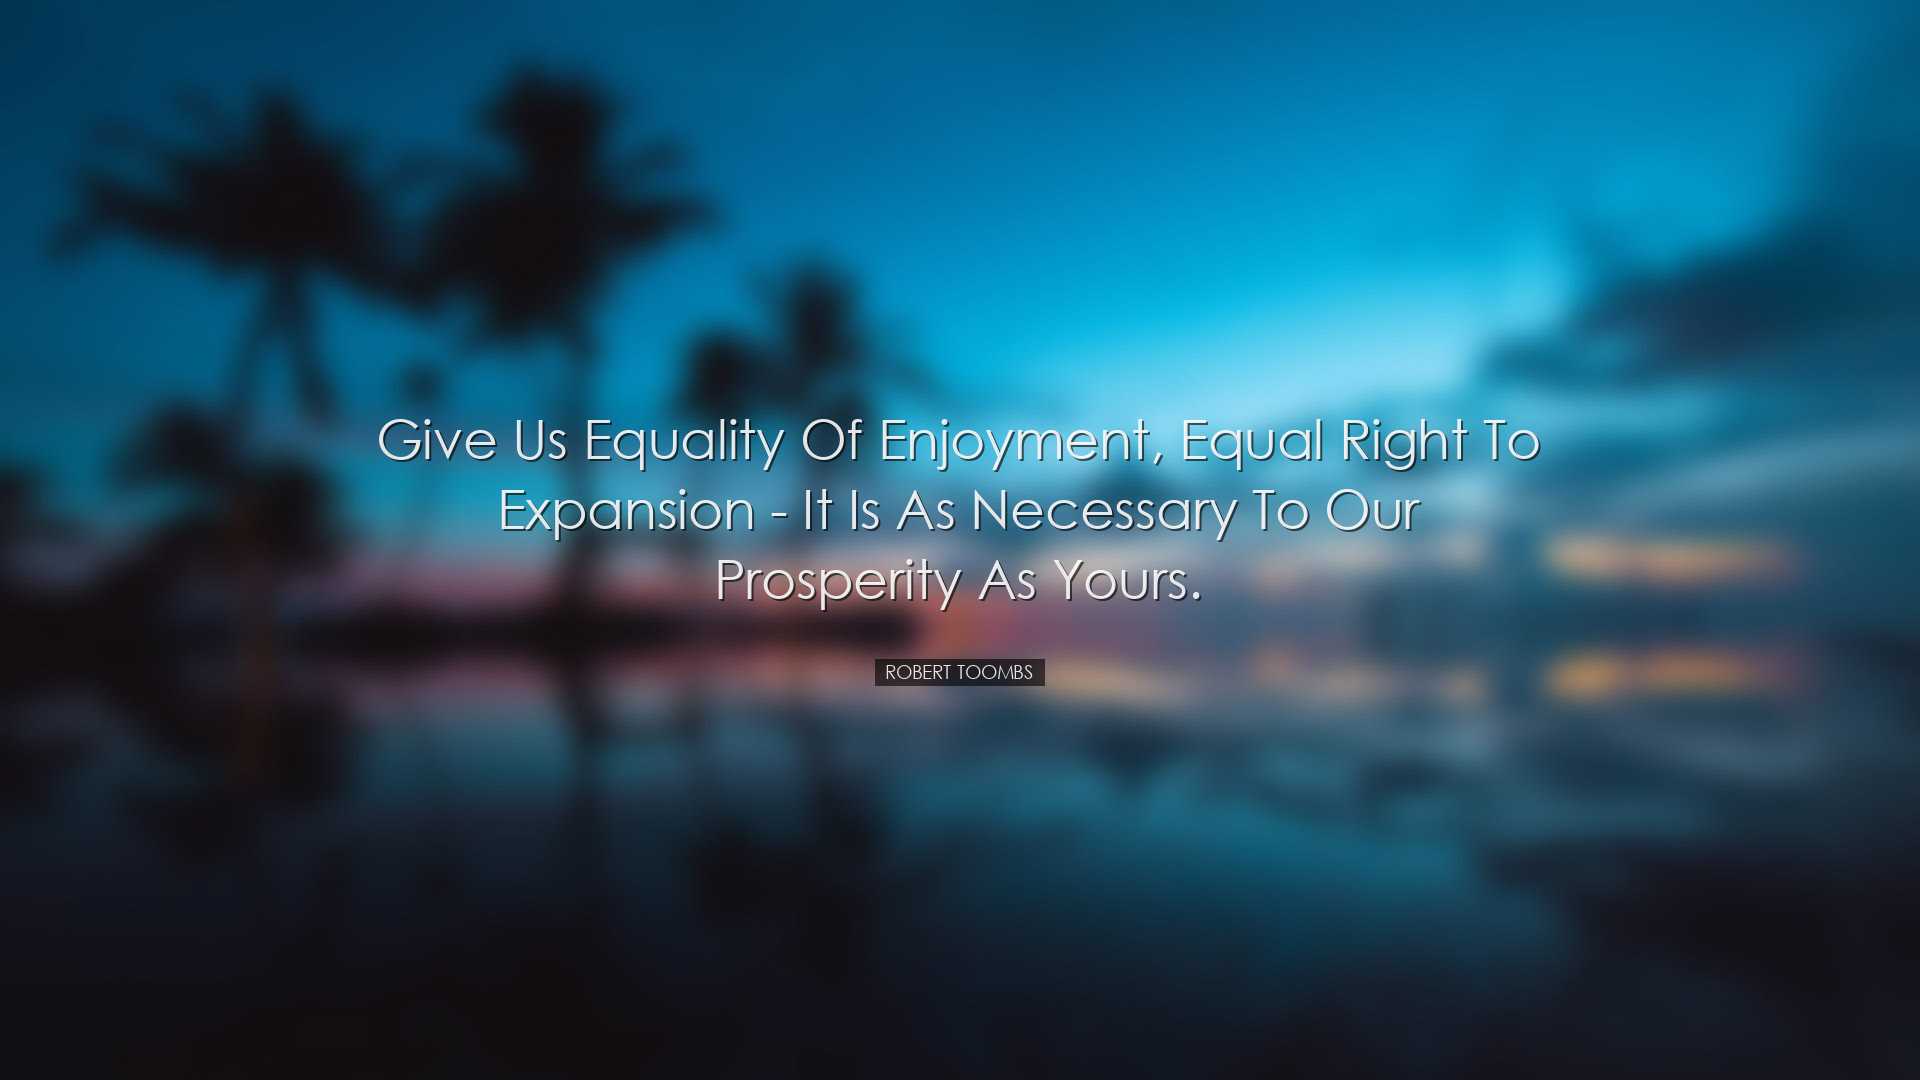 Give us equality of enjoyment, equal right to expansion - it is as